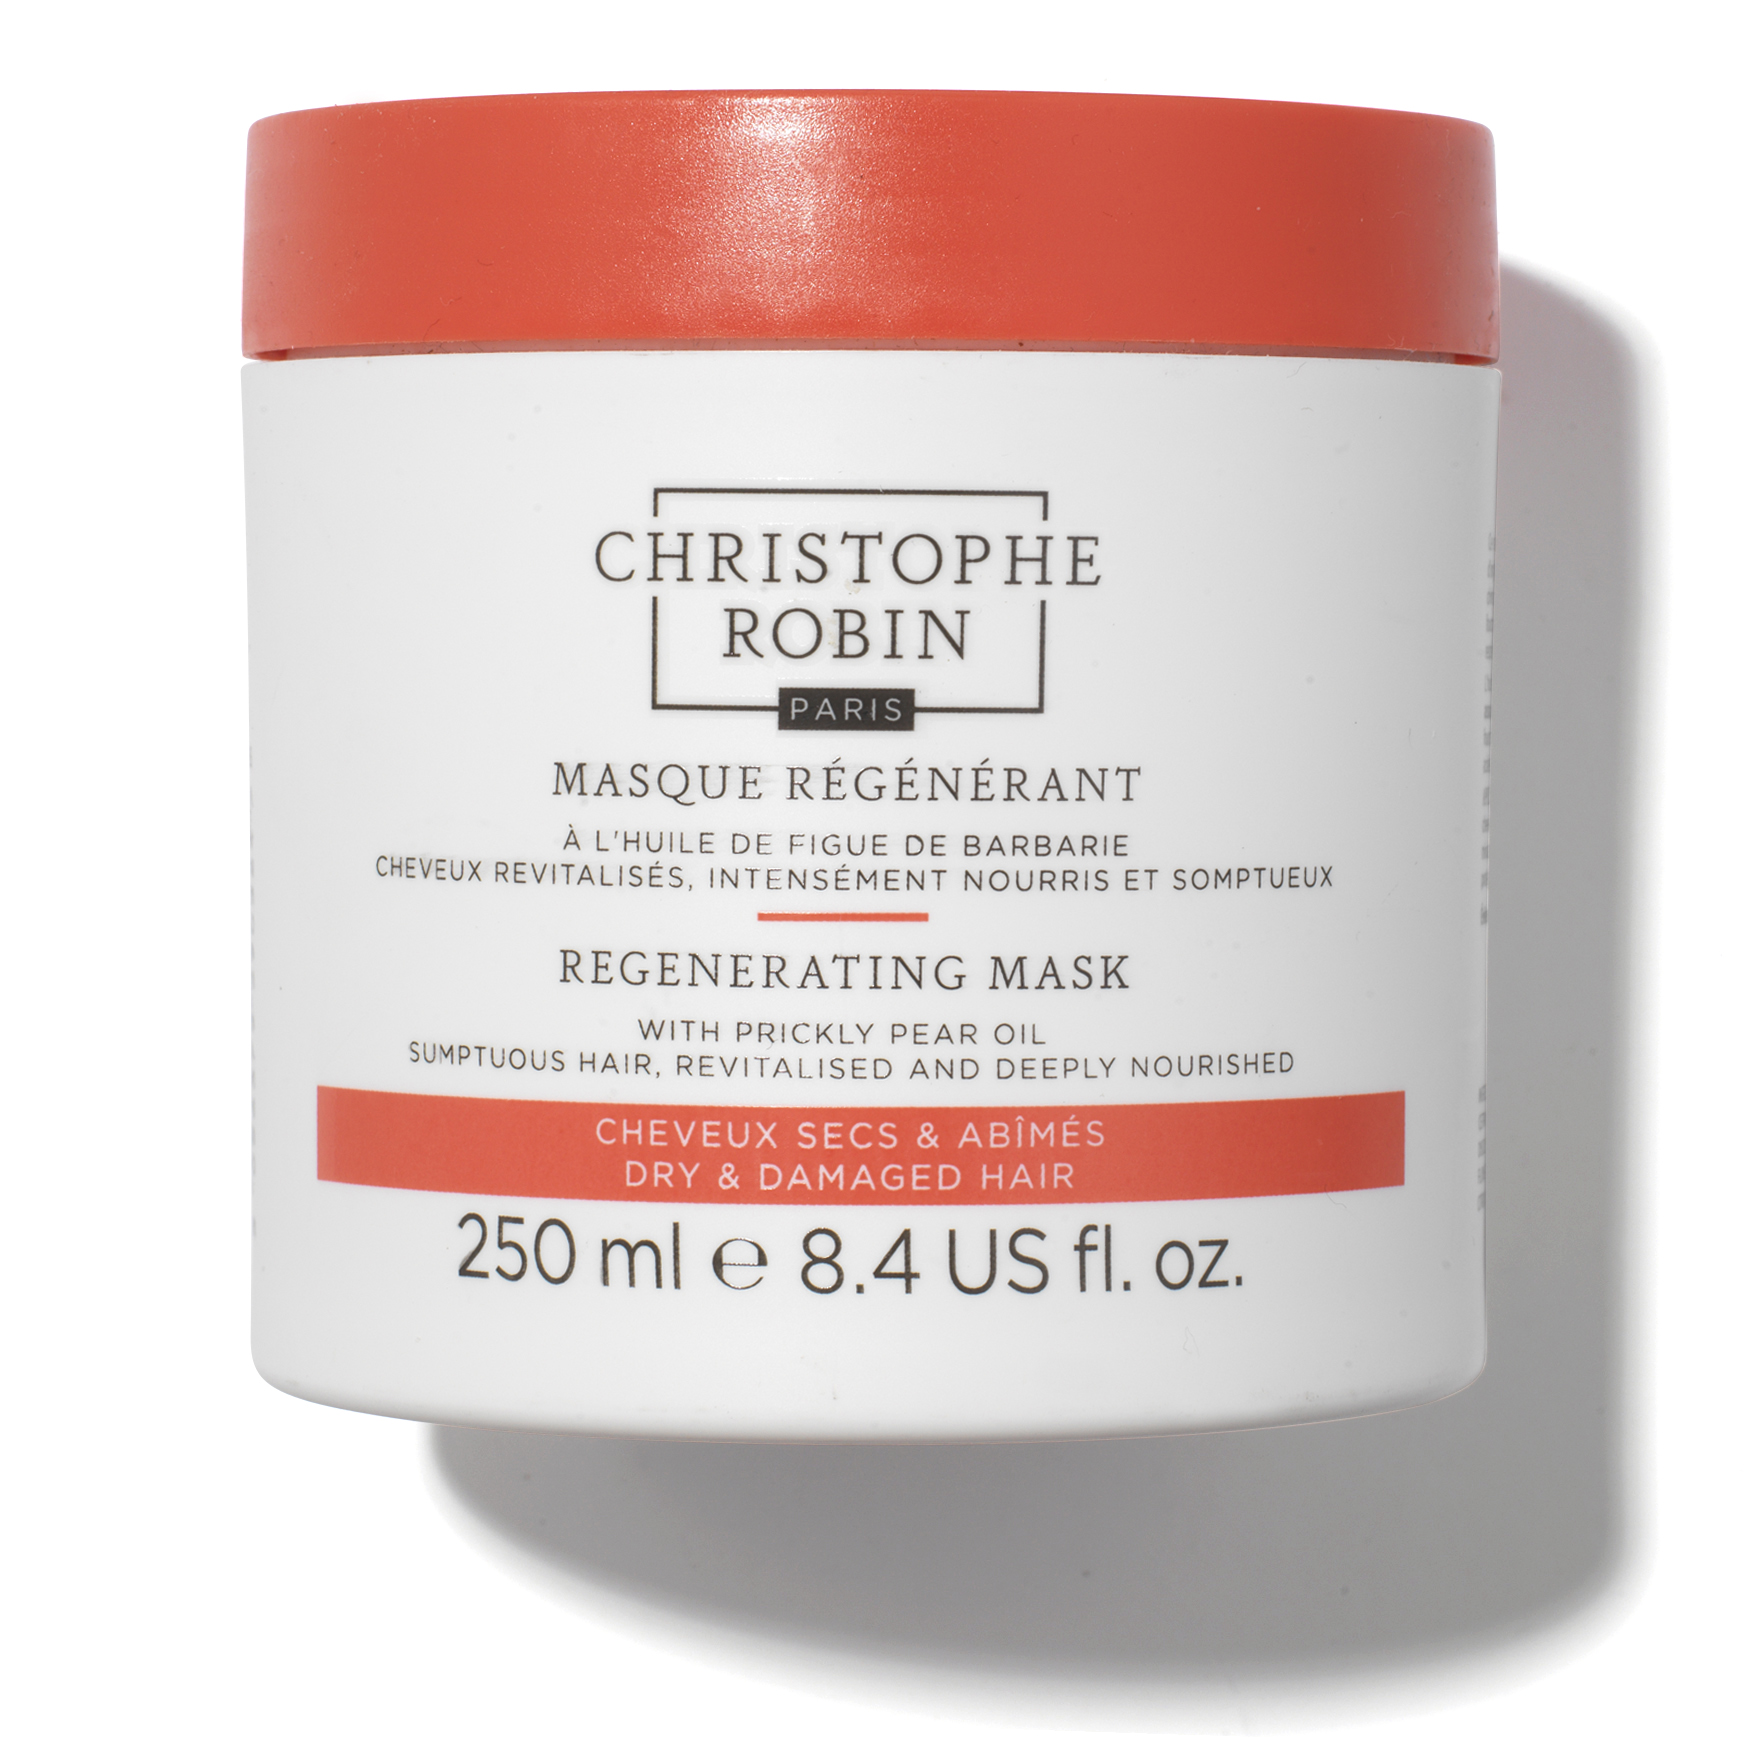 Christophe Robin Regenerating Mask With Prickly Pear Oil | Space NK